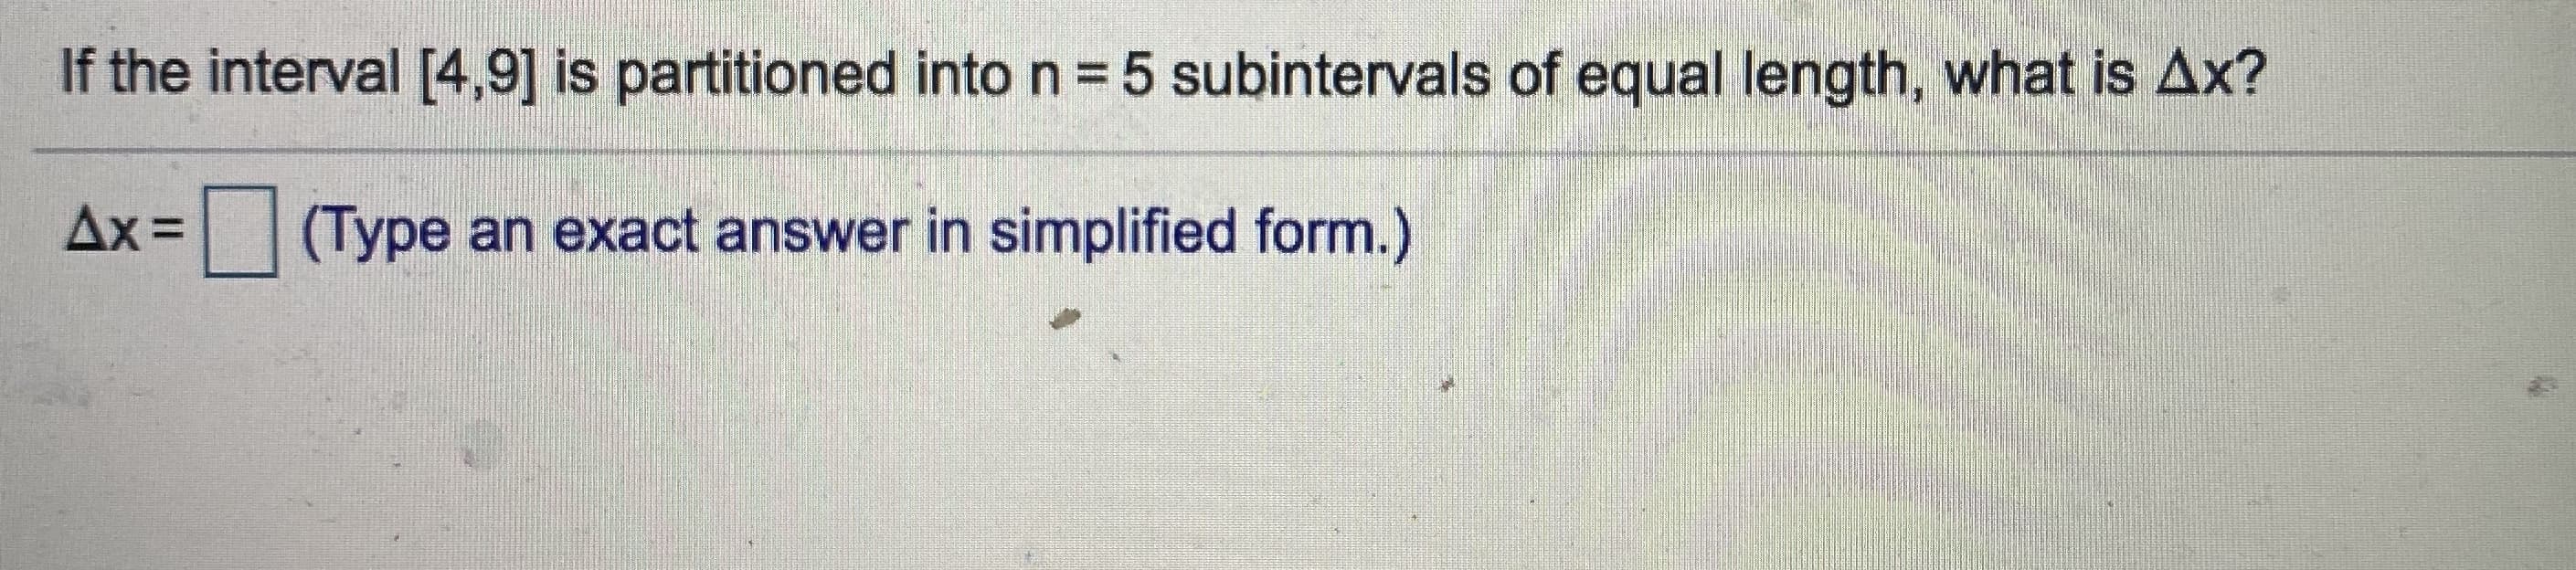 If the interval [4,9] is partitioned into n = 5 subintervals of equal length, what is Ax?
Ax =
(Type an exact answer in simplified form.)
